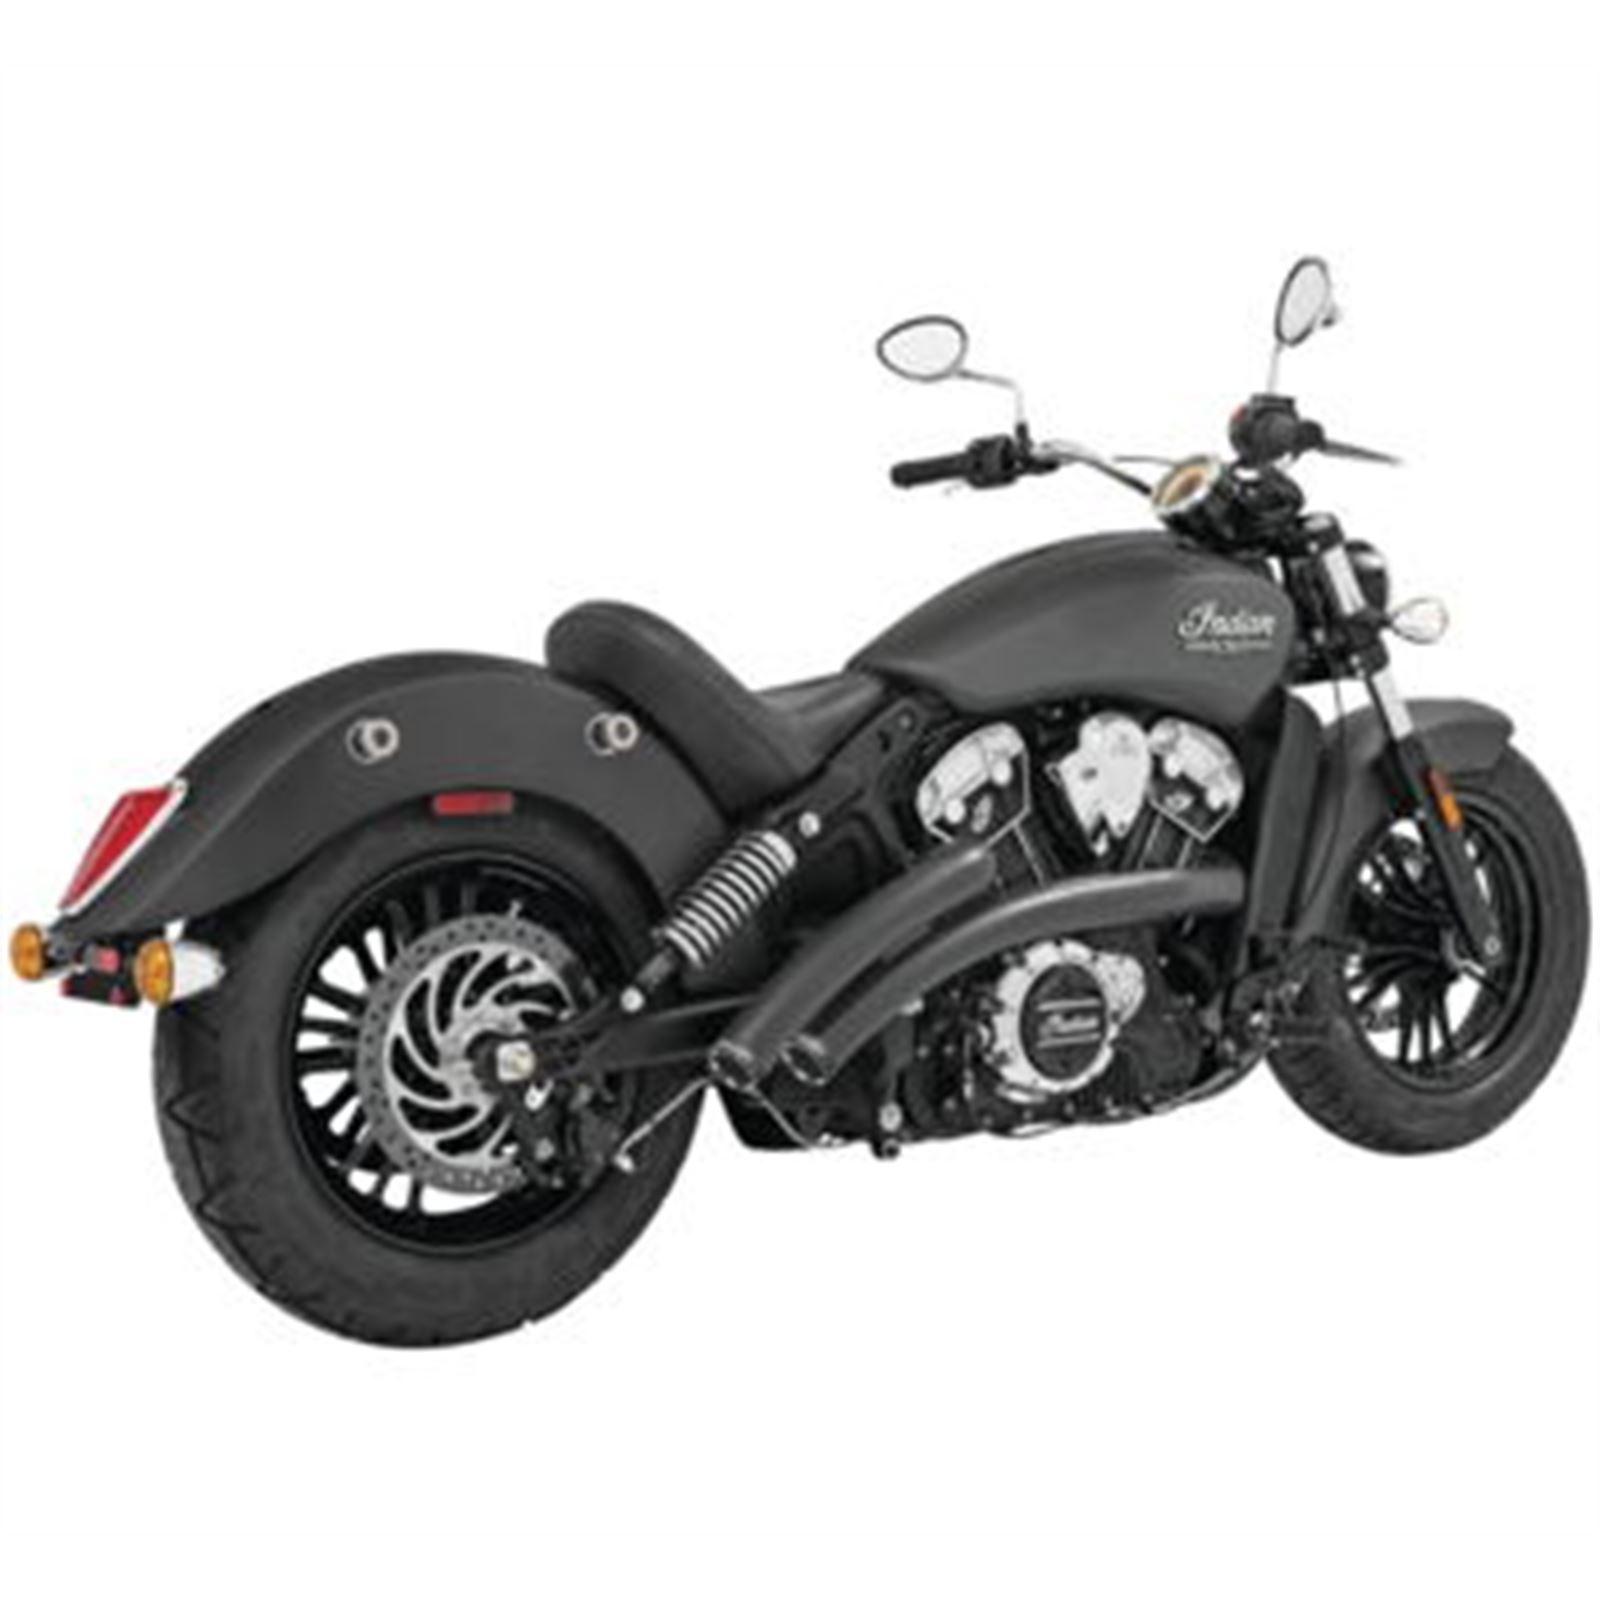 Freedom Performance Exhaust Radical Radius Crossover with Star Tips for Indian - Black